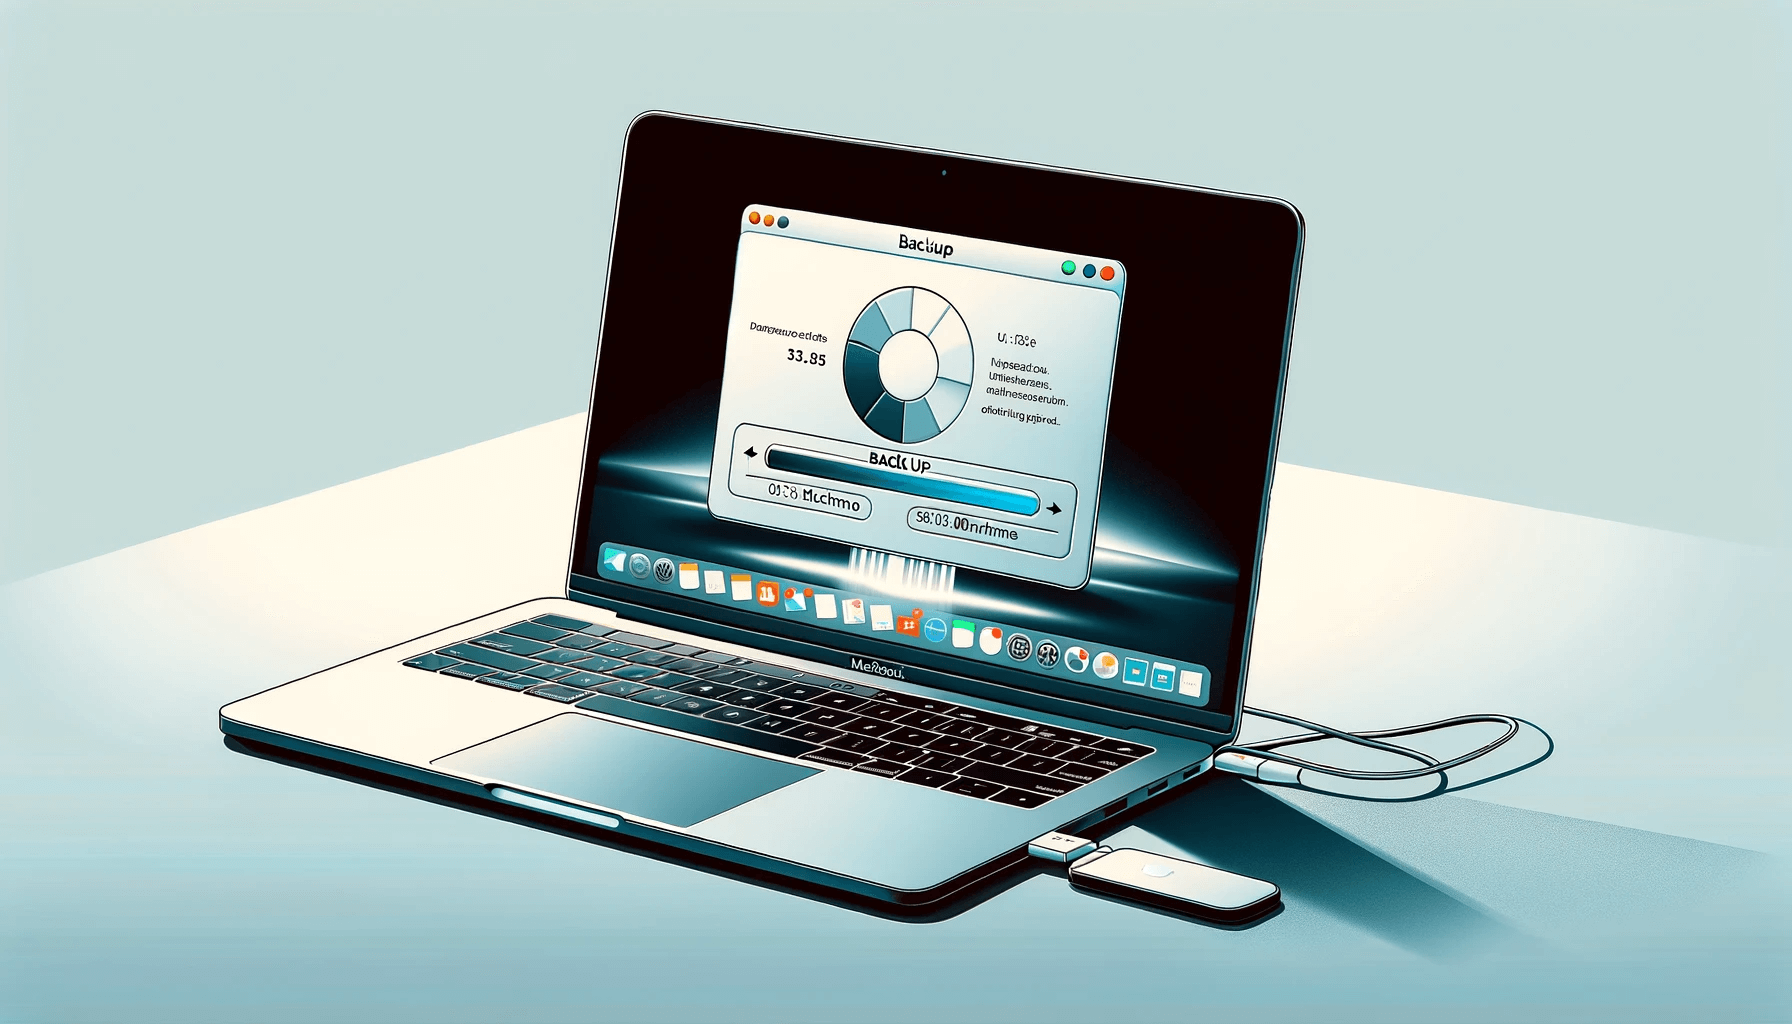 DALL·E 2023 11 23 15.16.24 A digital illustration of a MacBook undergoing a backup process. The MacBook is shown open on a desk with its screen displaying the backup interface